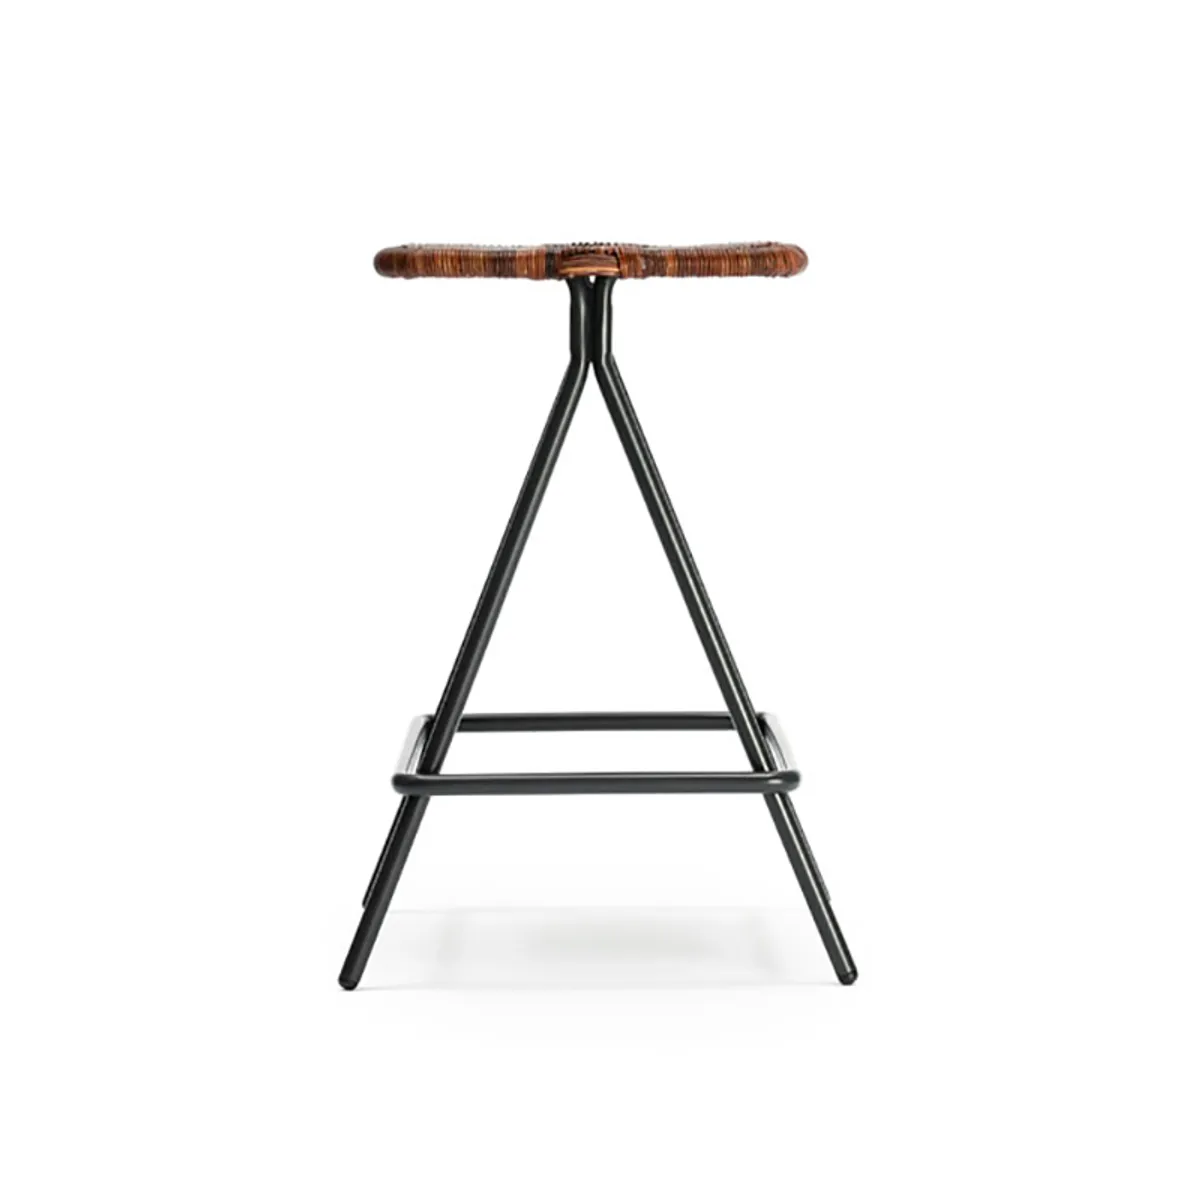 Persi Stool Charcoal Rust Side Rattan And Metal Furniture For Restaurants And Cafes 2